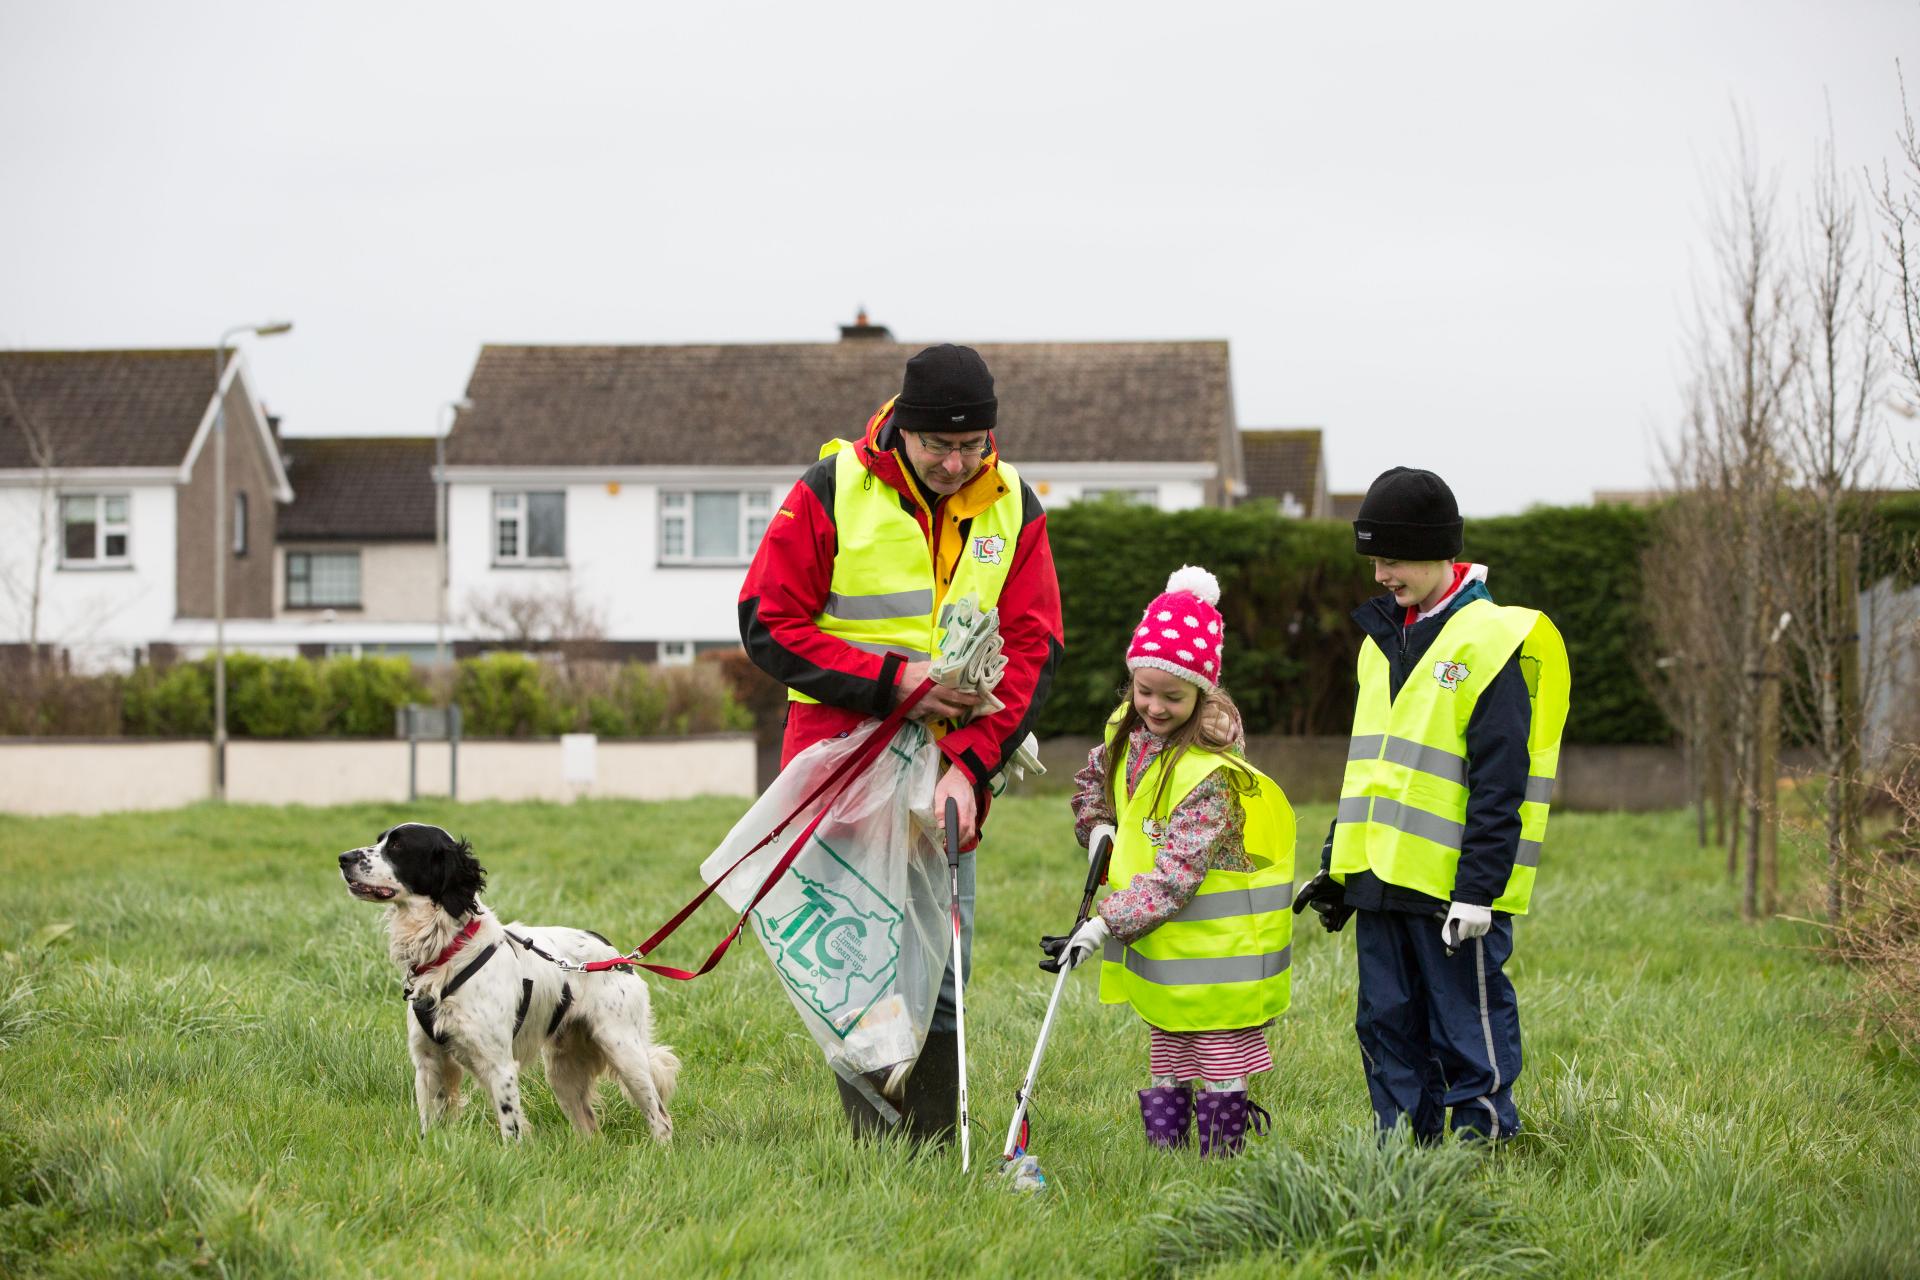 A family tidy up in a grassy area